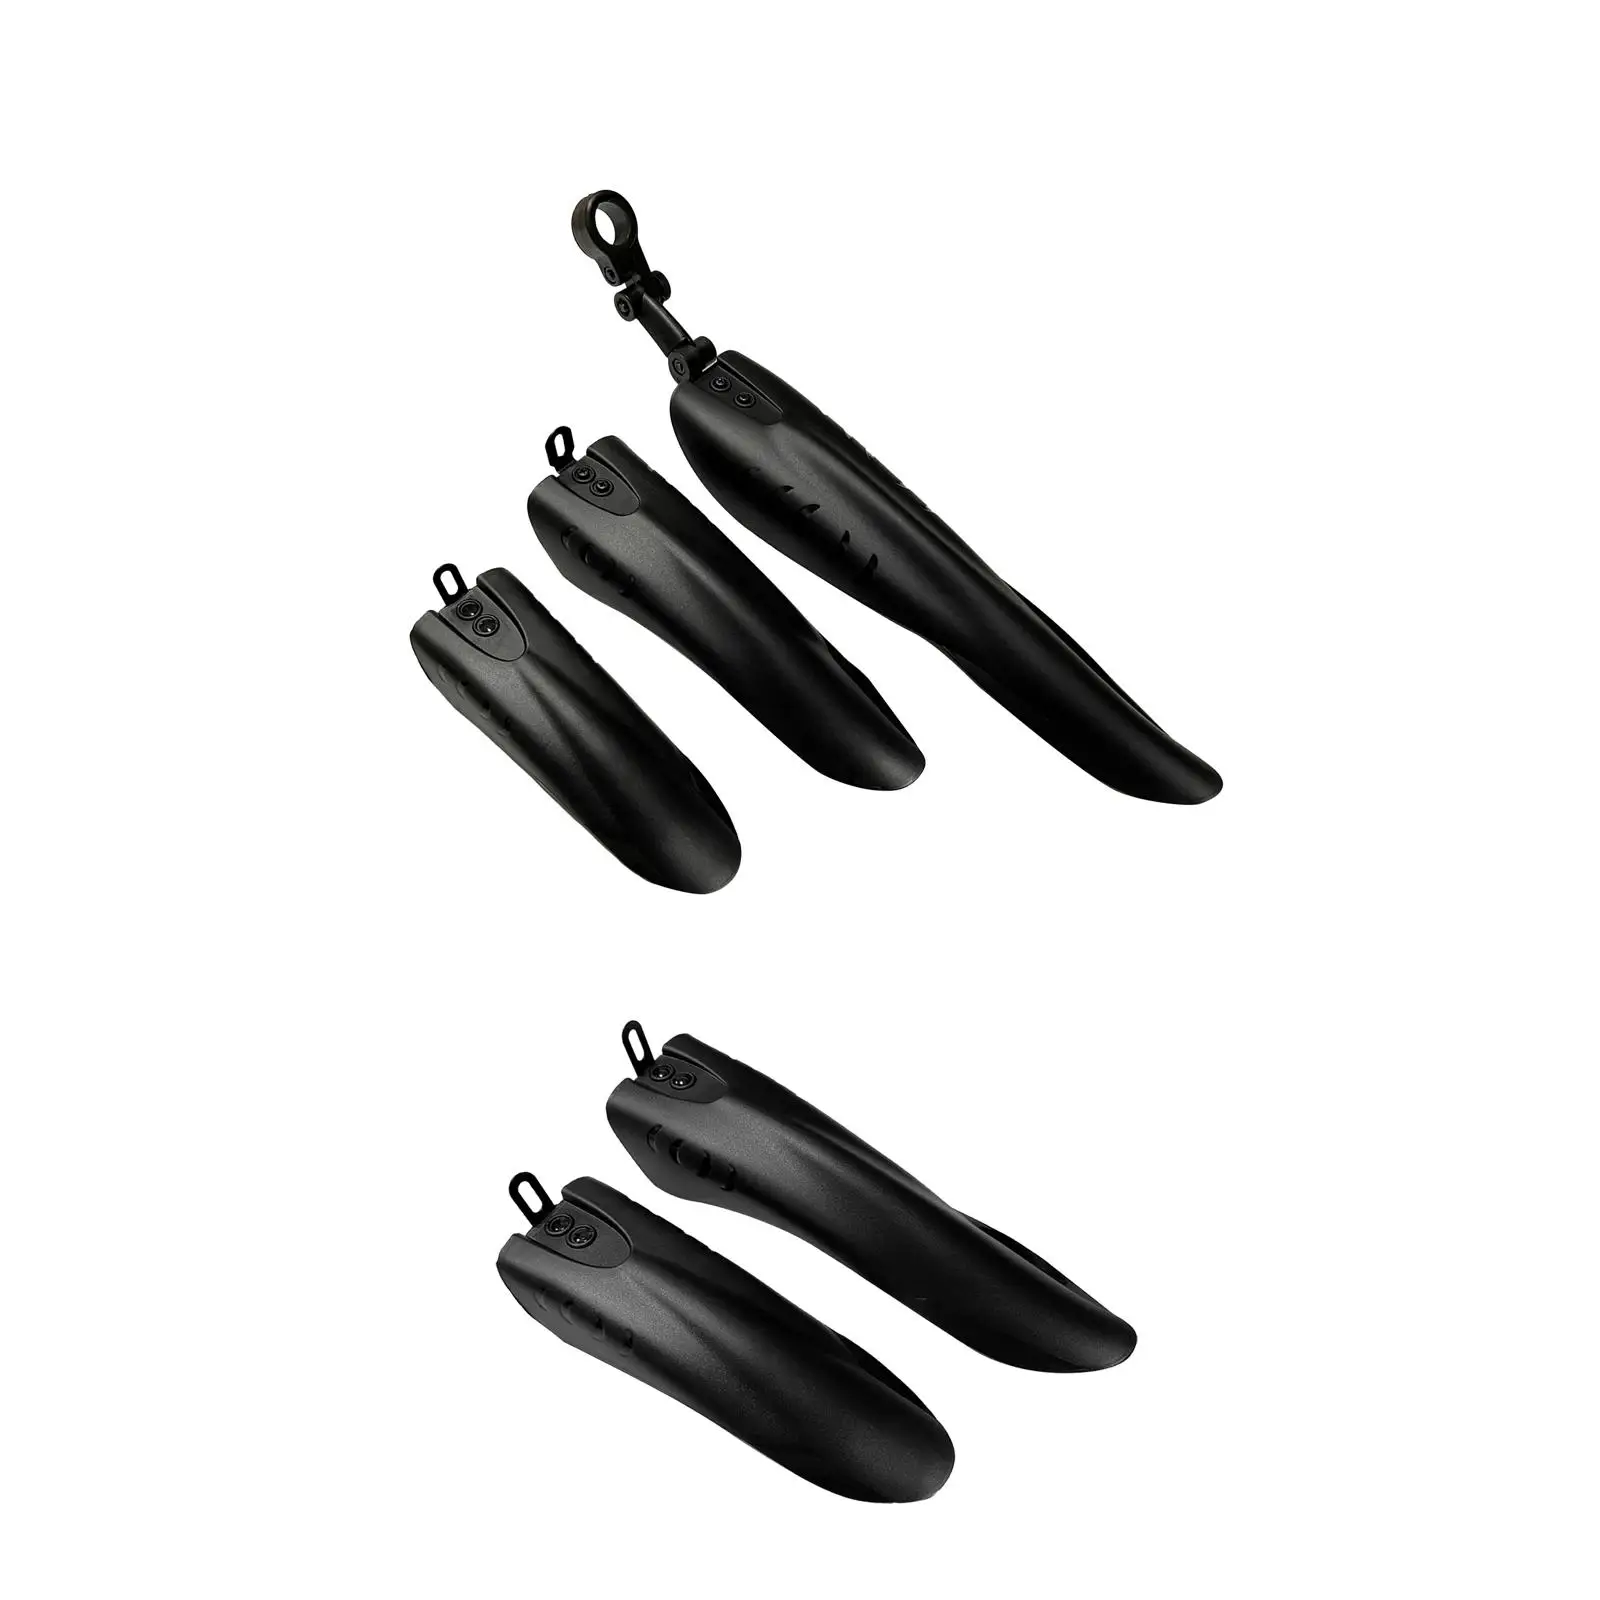 Mountain Bike Mudguard Set Repair Simple Installation Sturdy Wheel Protection Spare Parts Mud Guard for Outdoor Riding